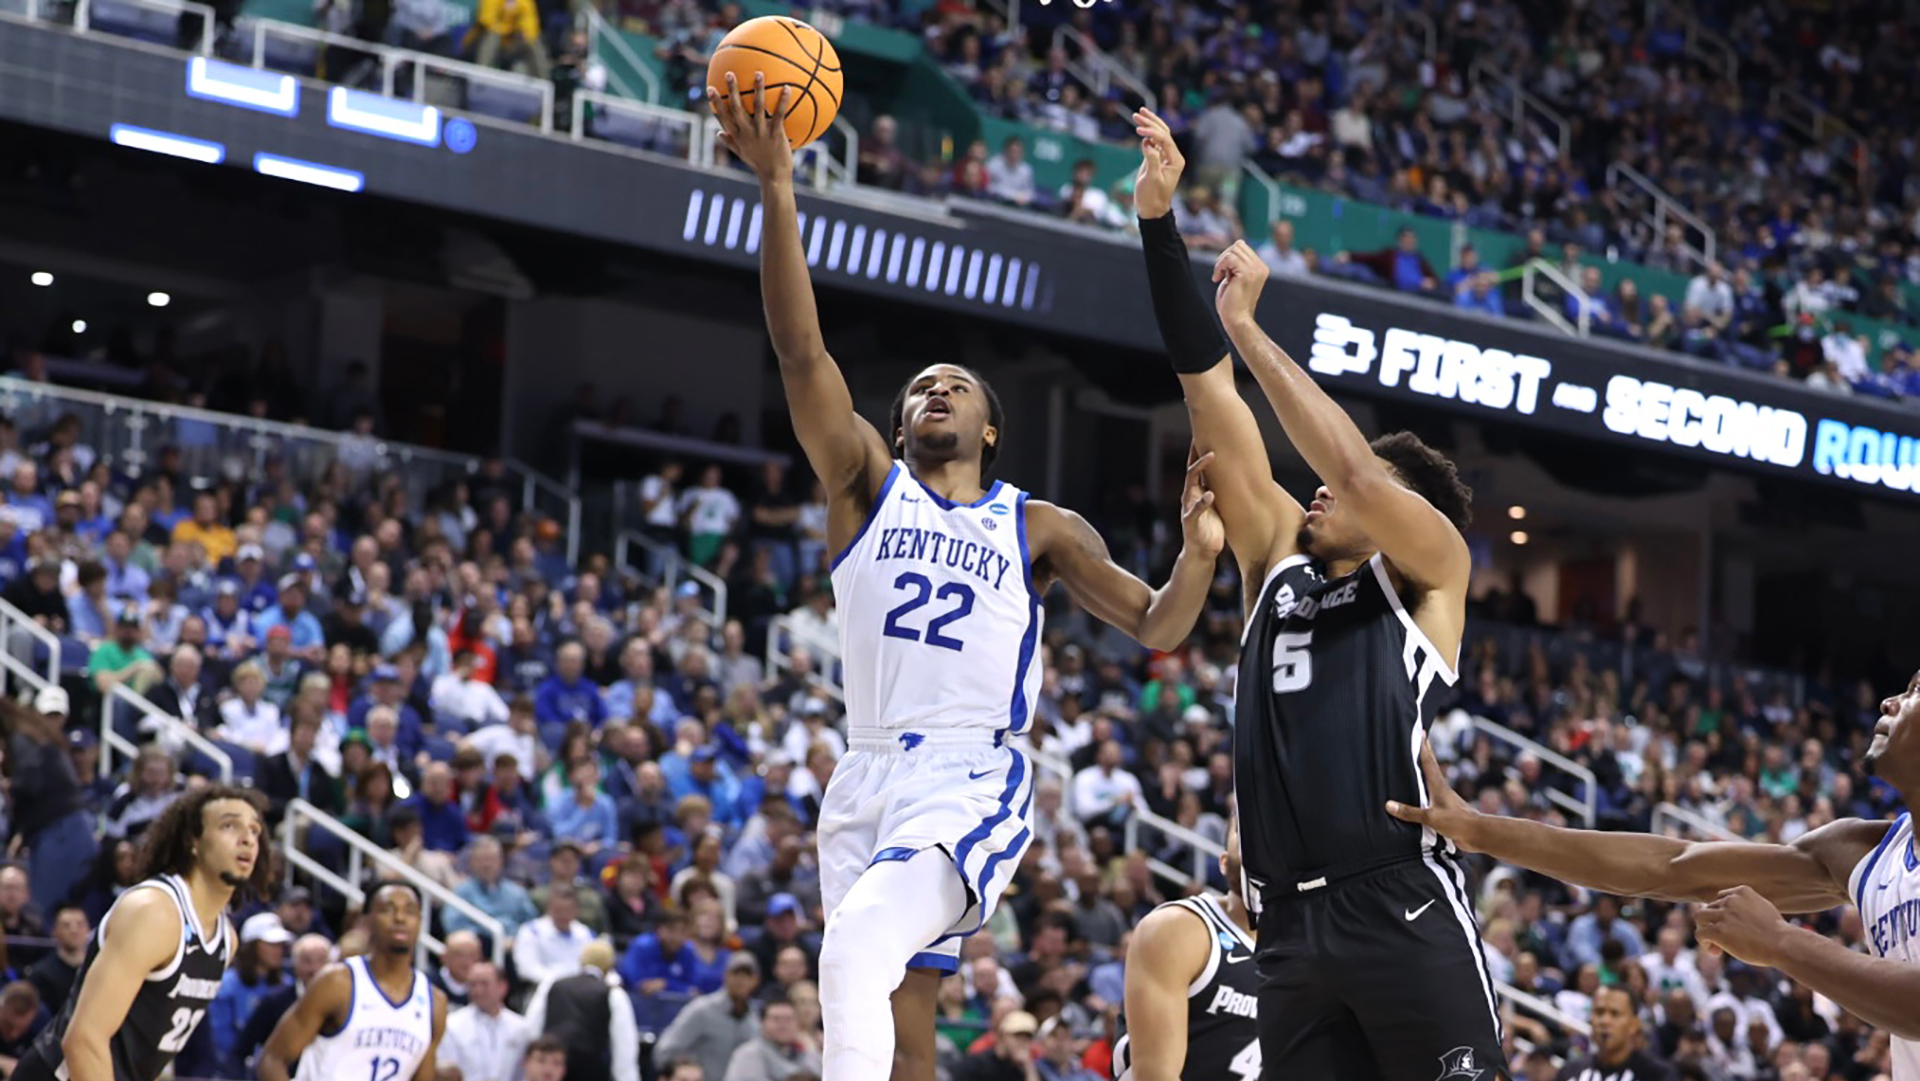 Kentucky-Providence Postgame Notes